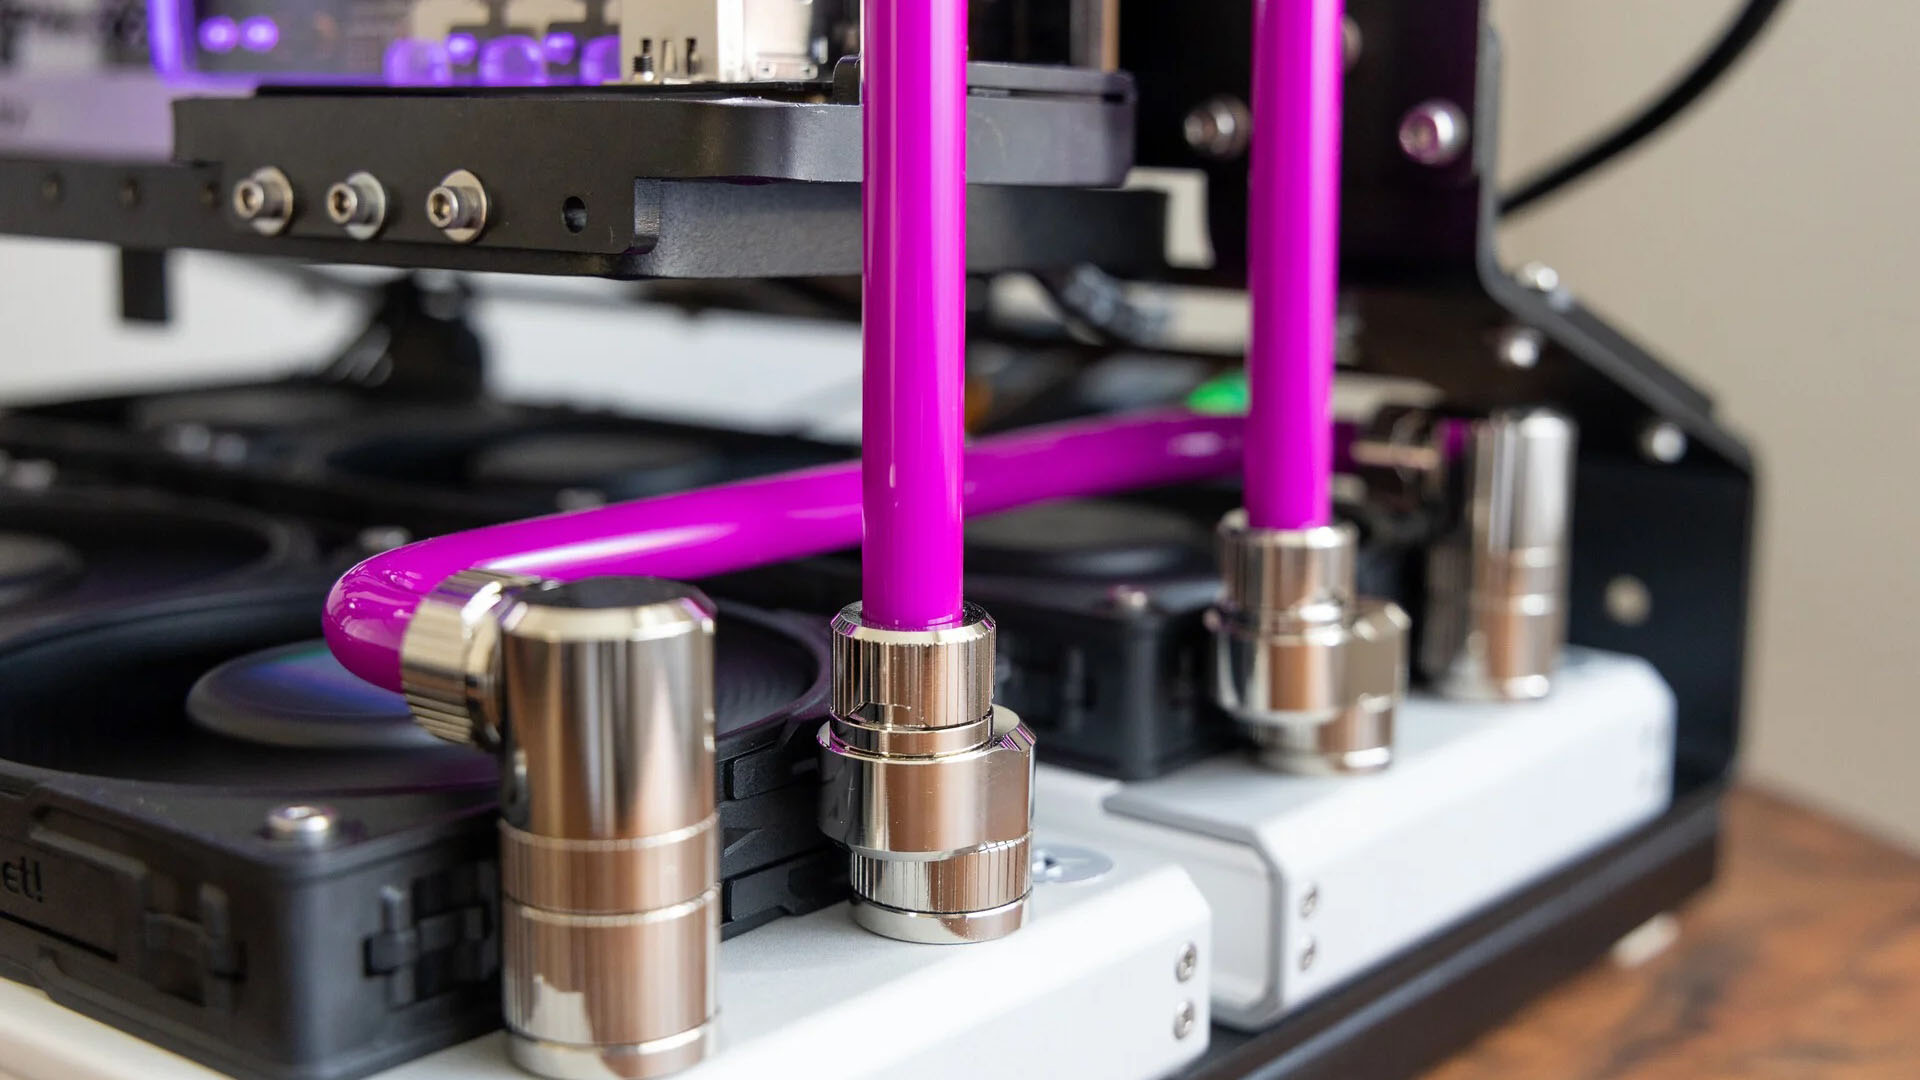 The watercooling tubing carrying a magenta colored coolant